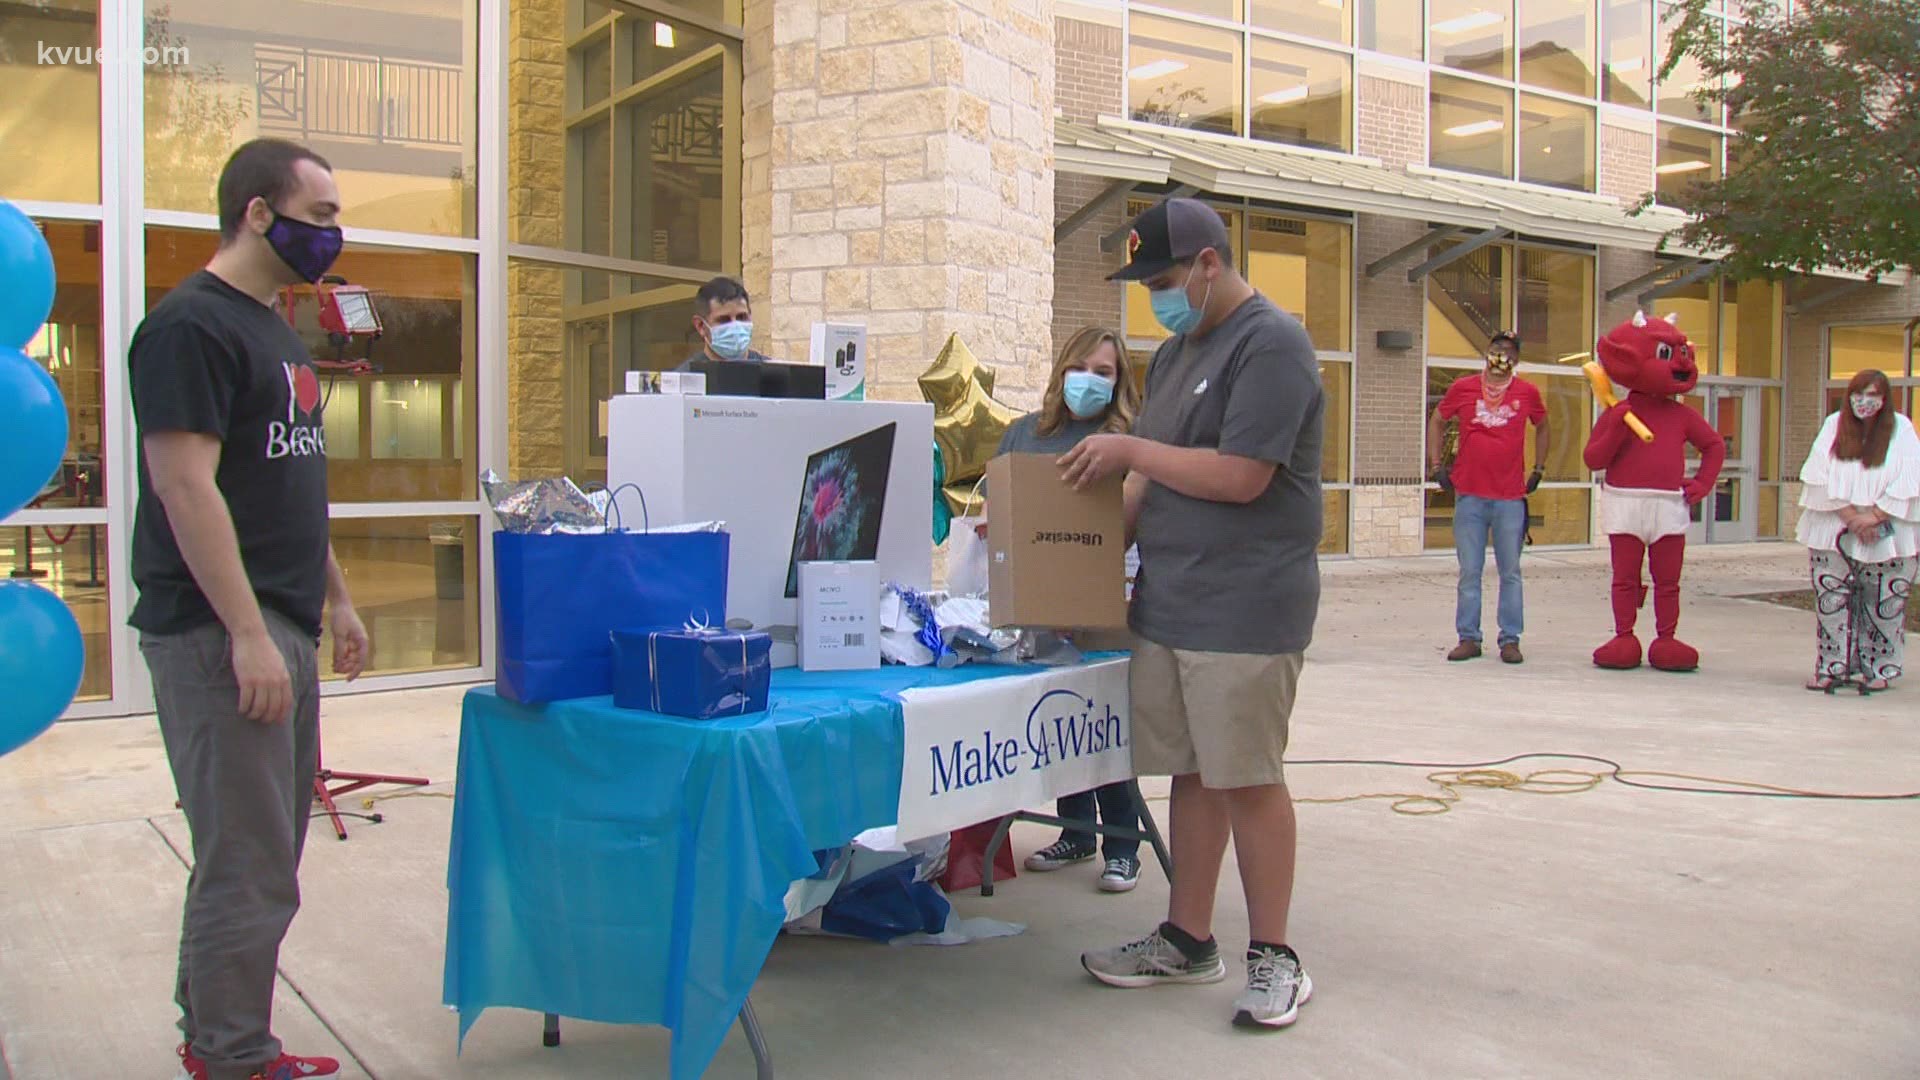 Make-A-Wish made it possible for Round Rock teen Ruben's wish to come true. KVUE was there when he was surprised.